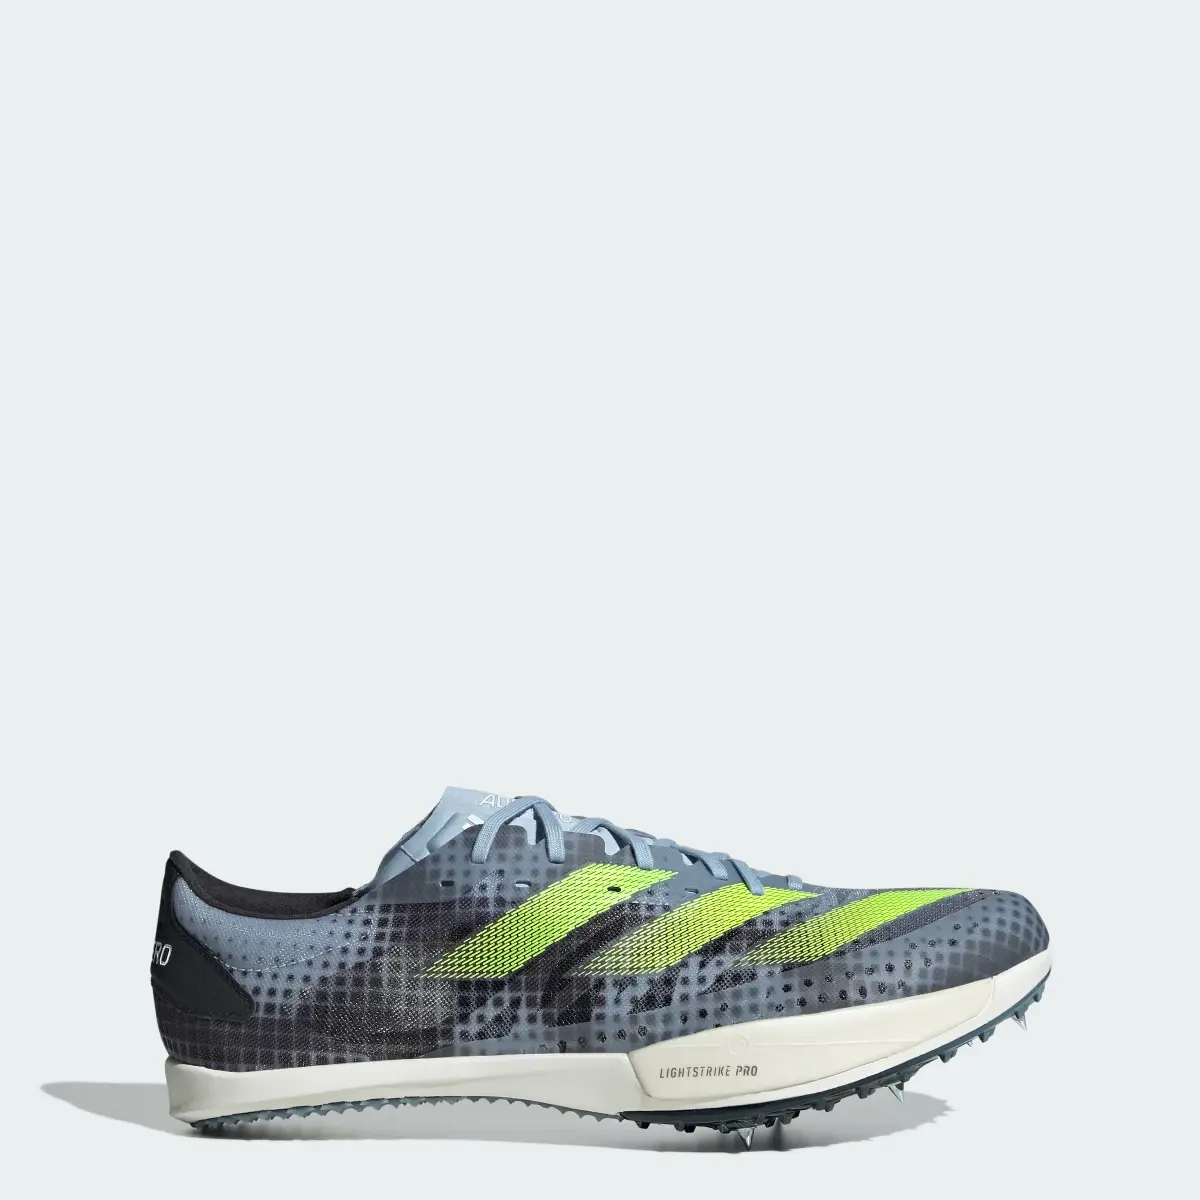 Adidas Adizero Ambition Track and Field Lightstrike Shoes. 1